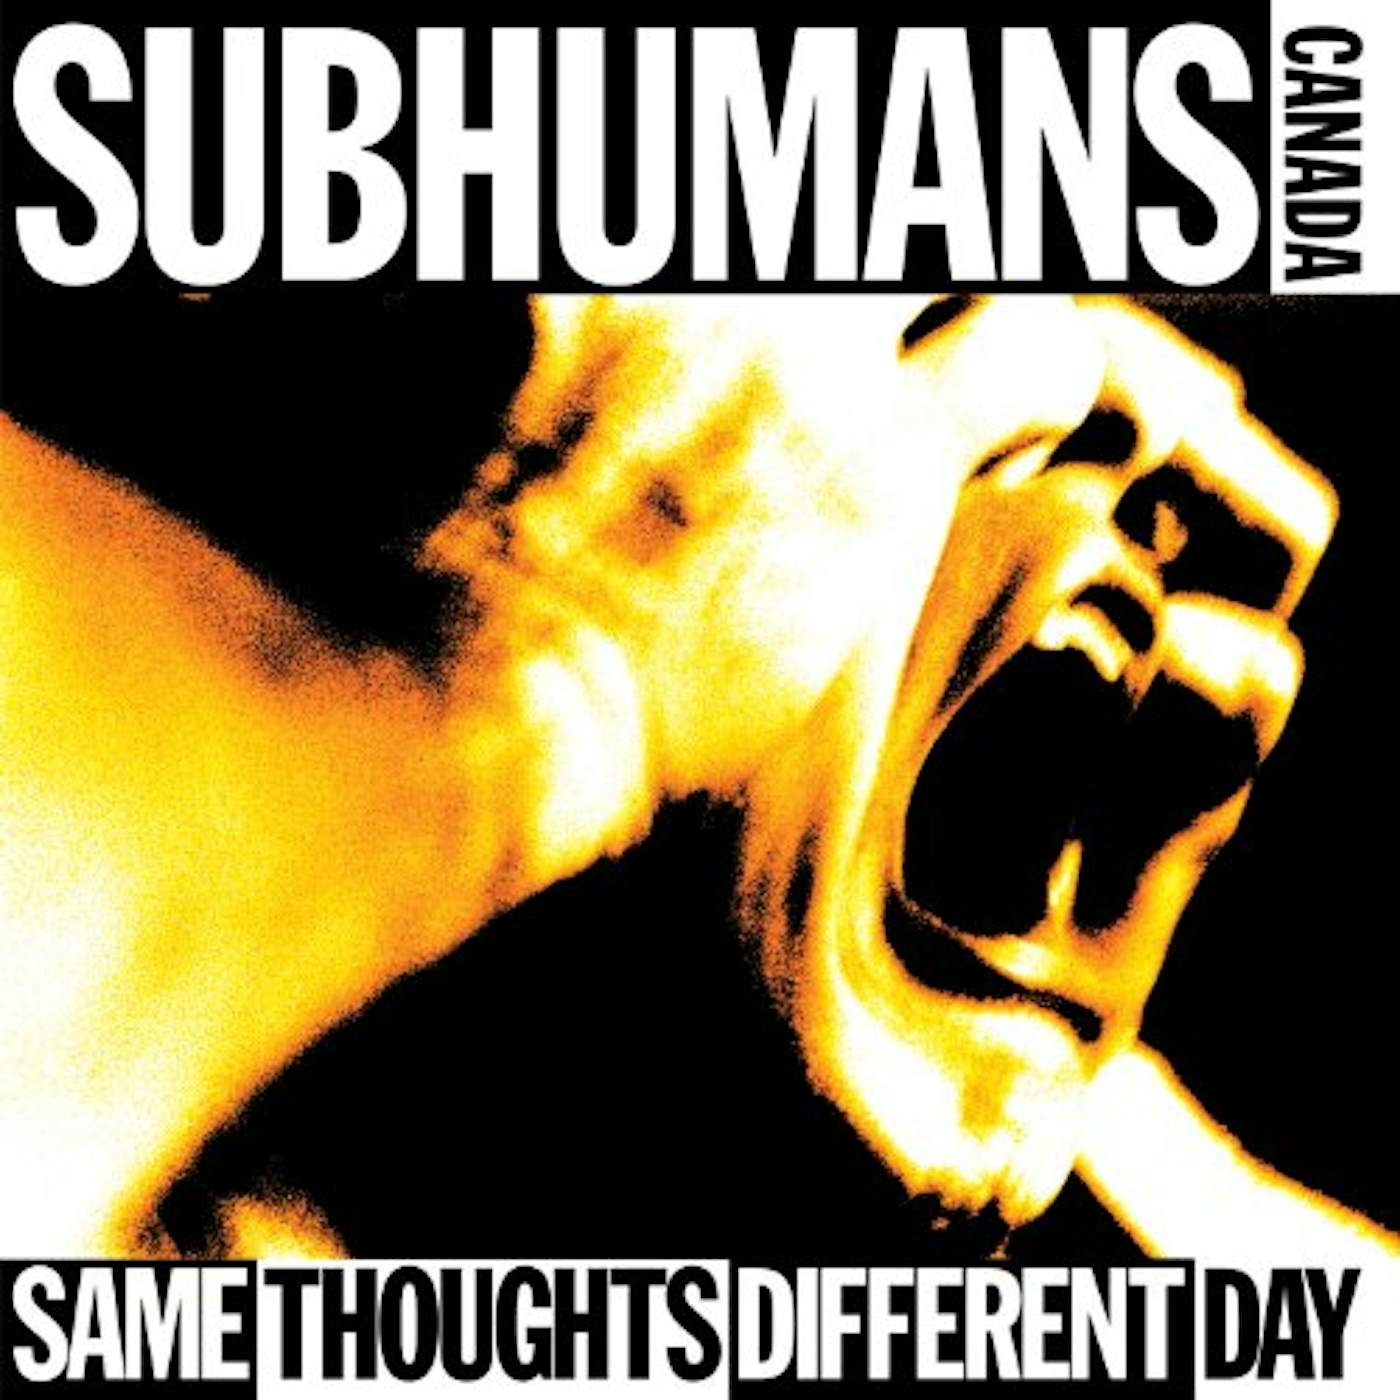 Subhumans SAME THOUGHTS DIFFERENT DAY CD